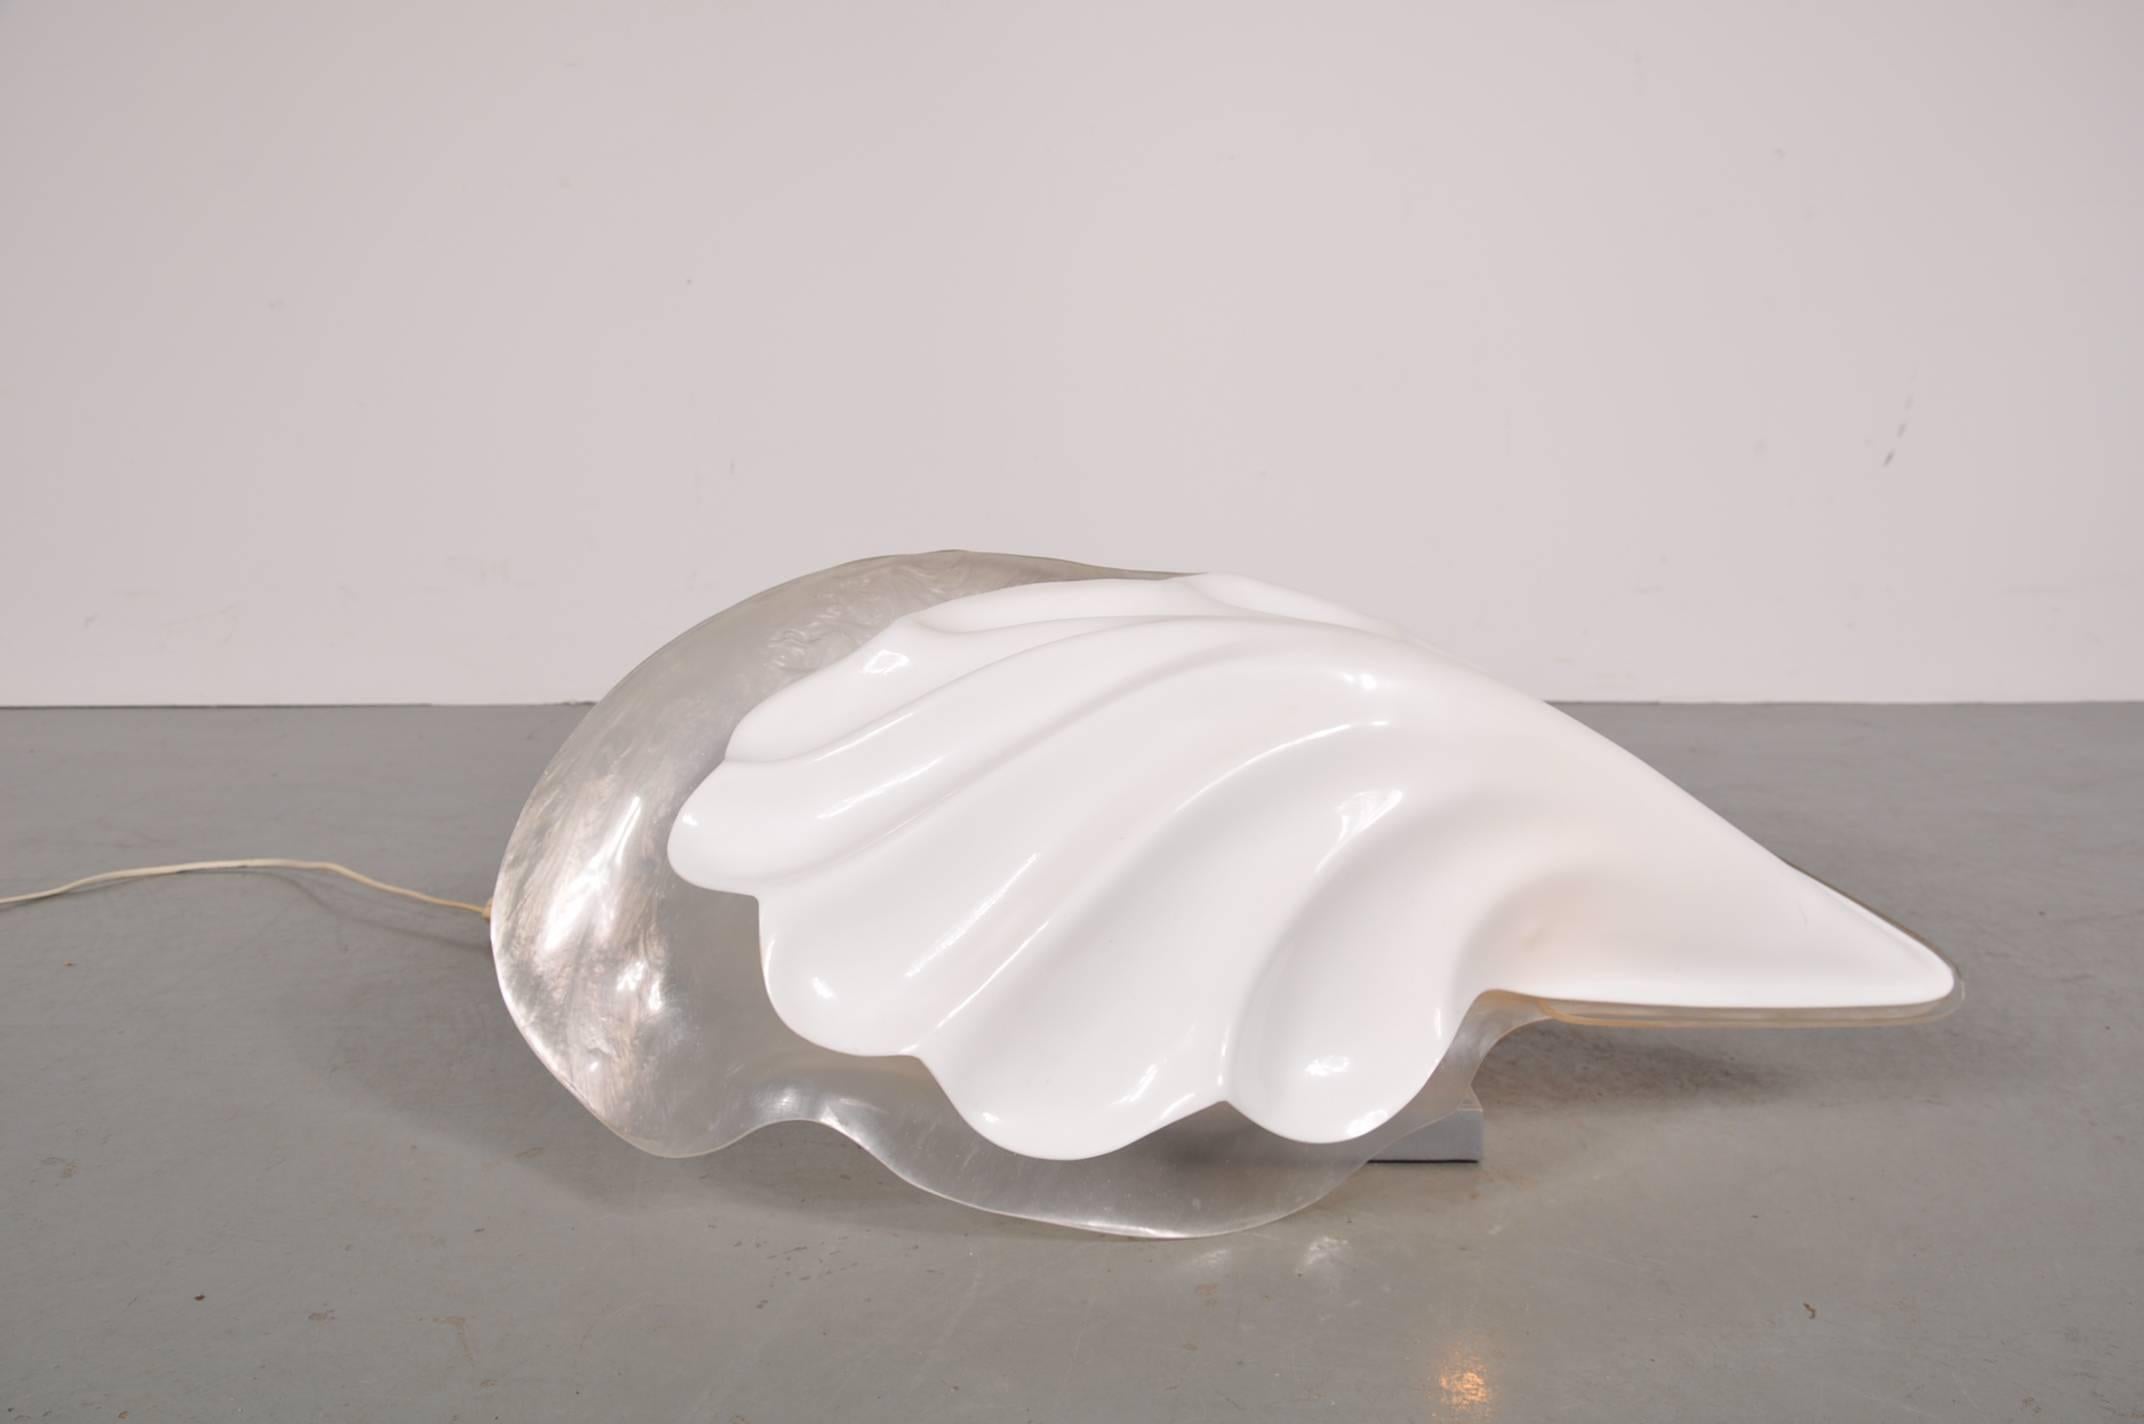 Beautiful shell table lamp by Rougier, manufactured around 1970.

This eye-catching piece has a high quality acrylic hood and grey metal base, giving it a beautiful appearance. It is signed Rougier on the base.

In good original condition with